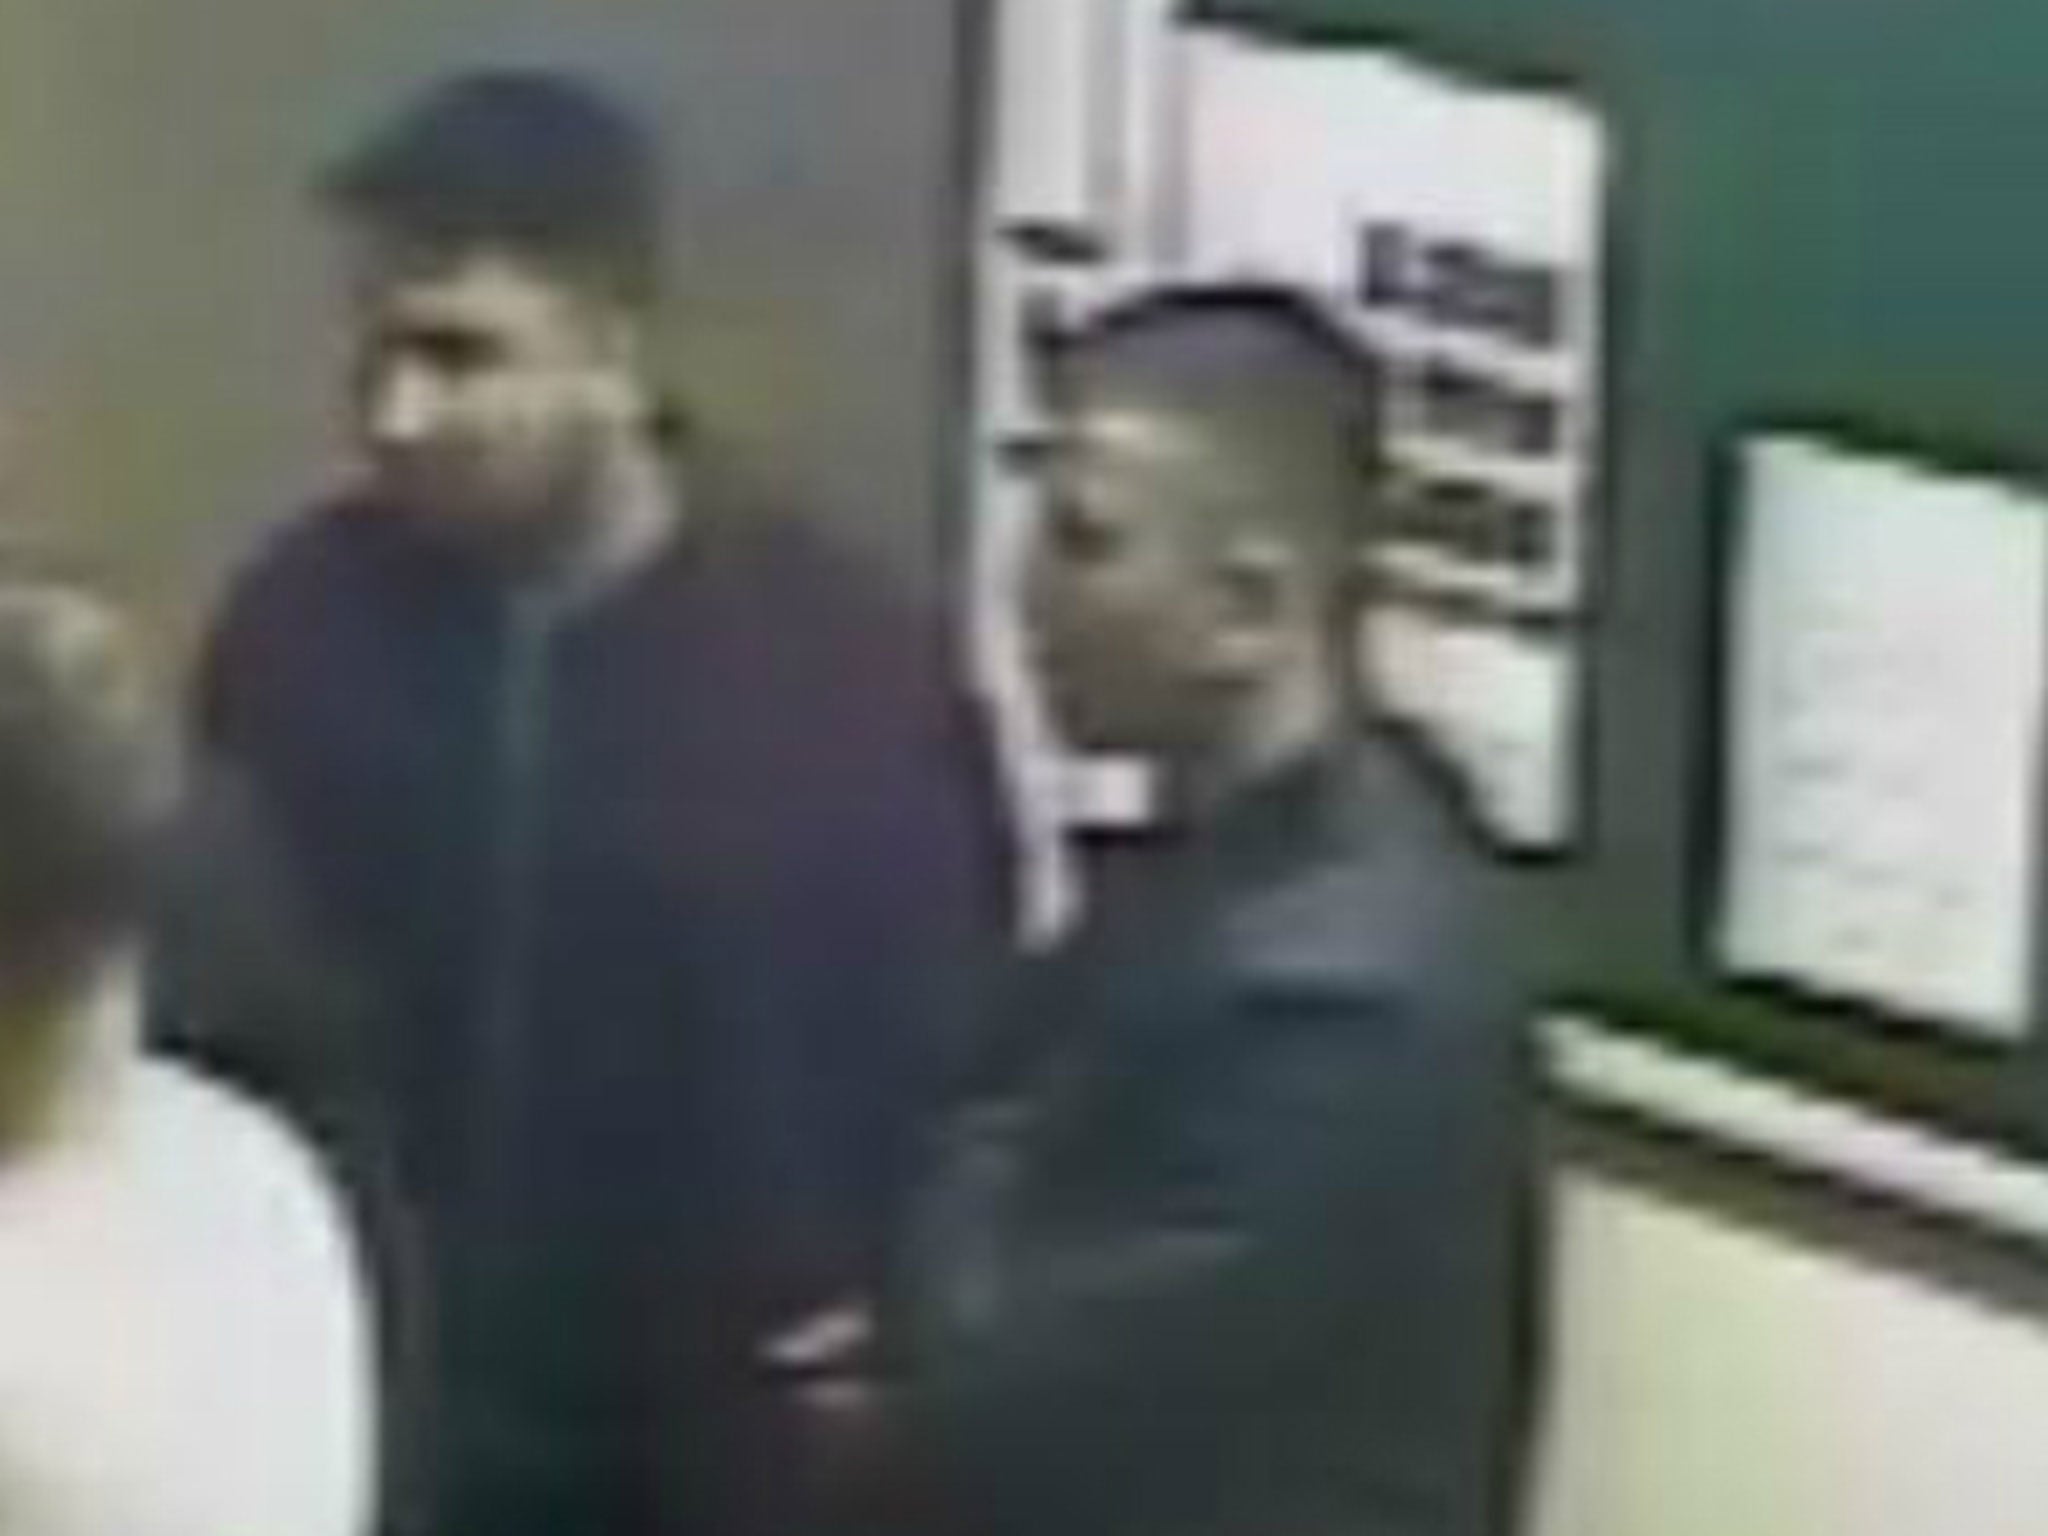 Police are searching for two men in connection with an assault on a woman.